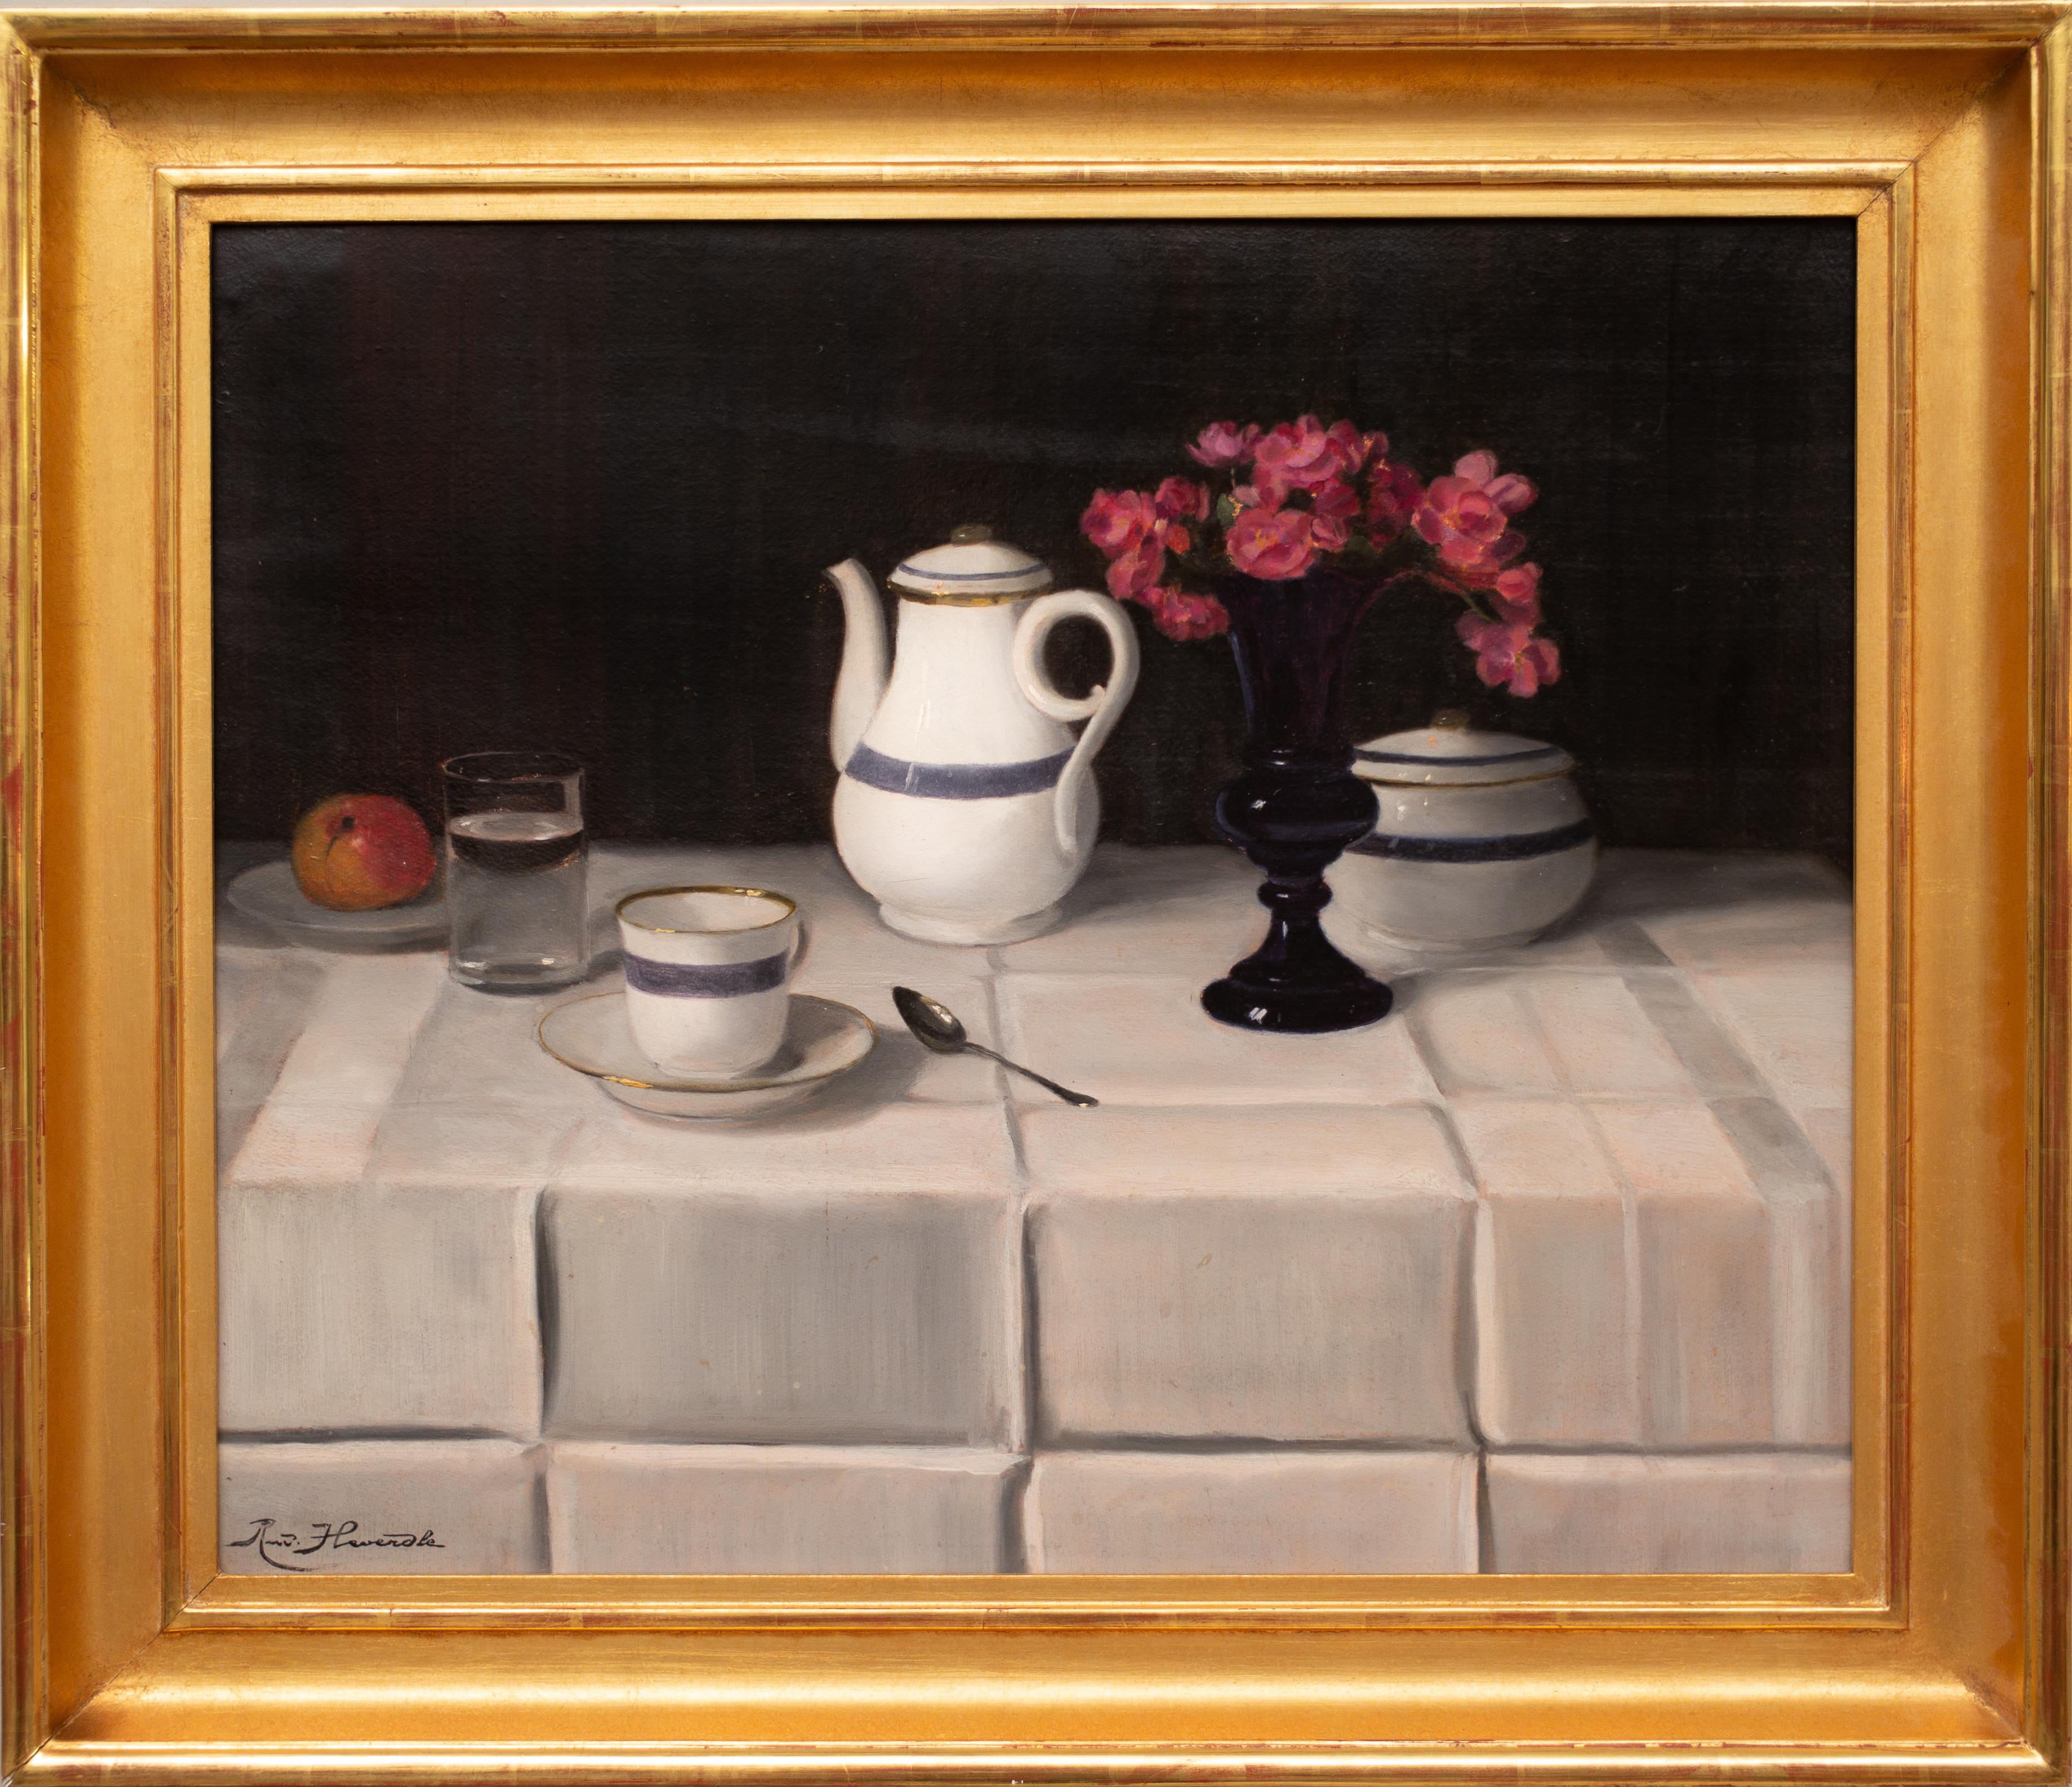 Rudolf Heverdle (Hungarian, 1876-1931)

Title: Still Life 

oil on board
signed Rud. Heverdle
board dimensions 20.86 x 25.29 inches (53 x 64 cm)
frame 25.98 x 31.31 inches (66 x 77 cm)

Provenance:
A Swedish Private Collection